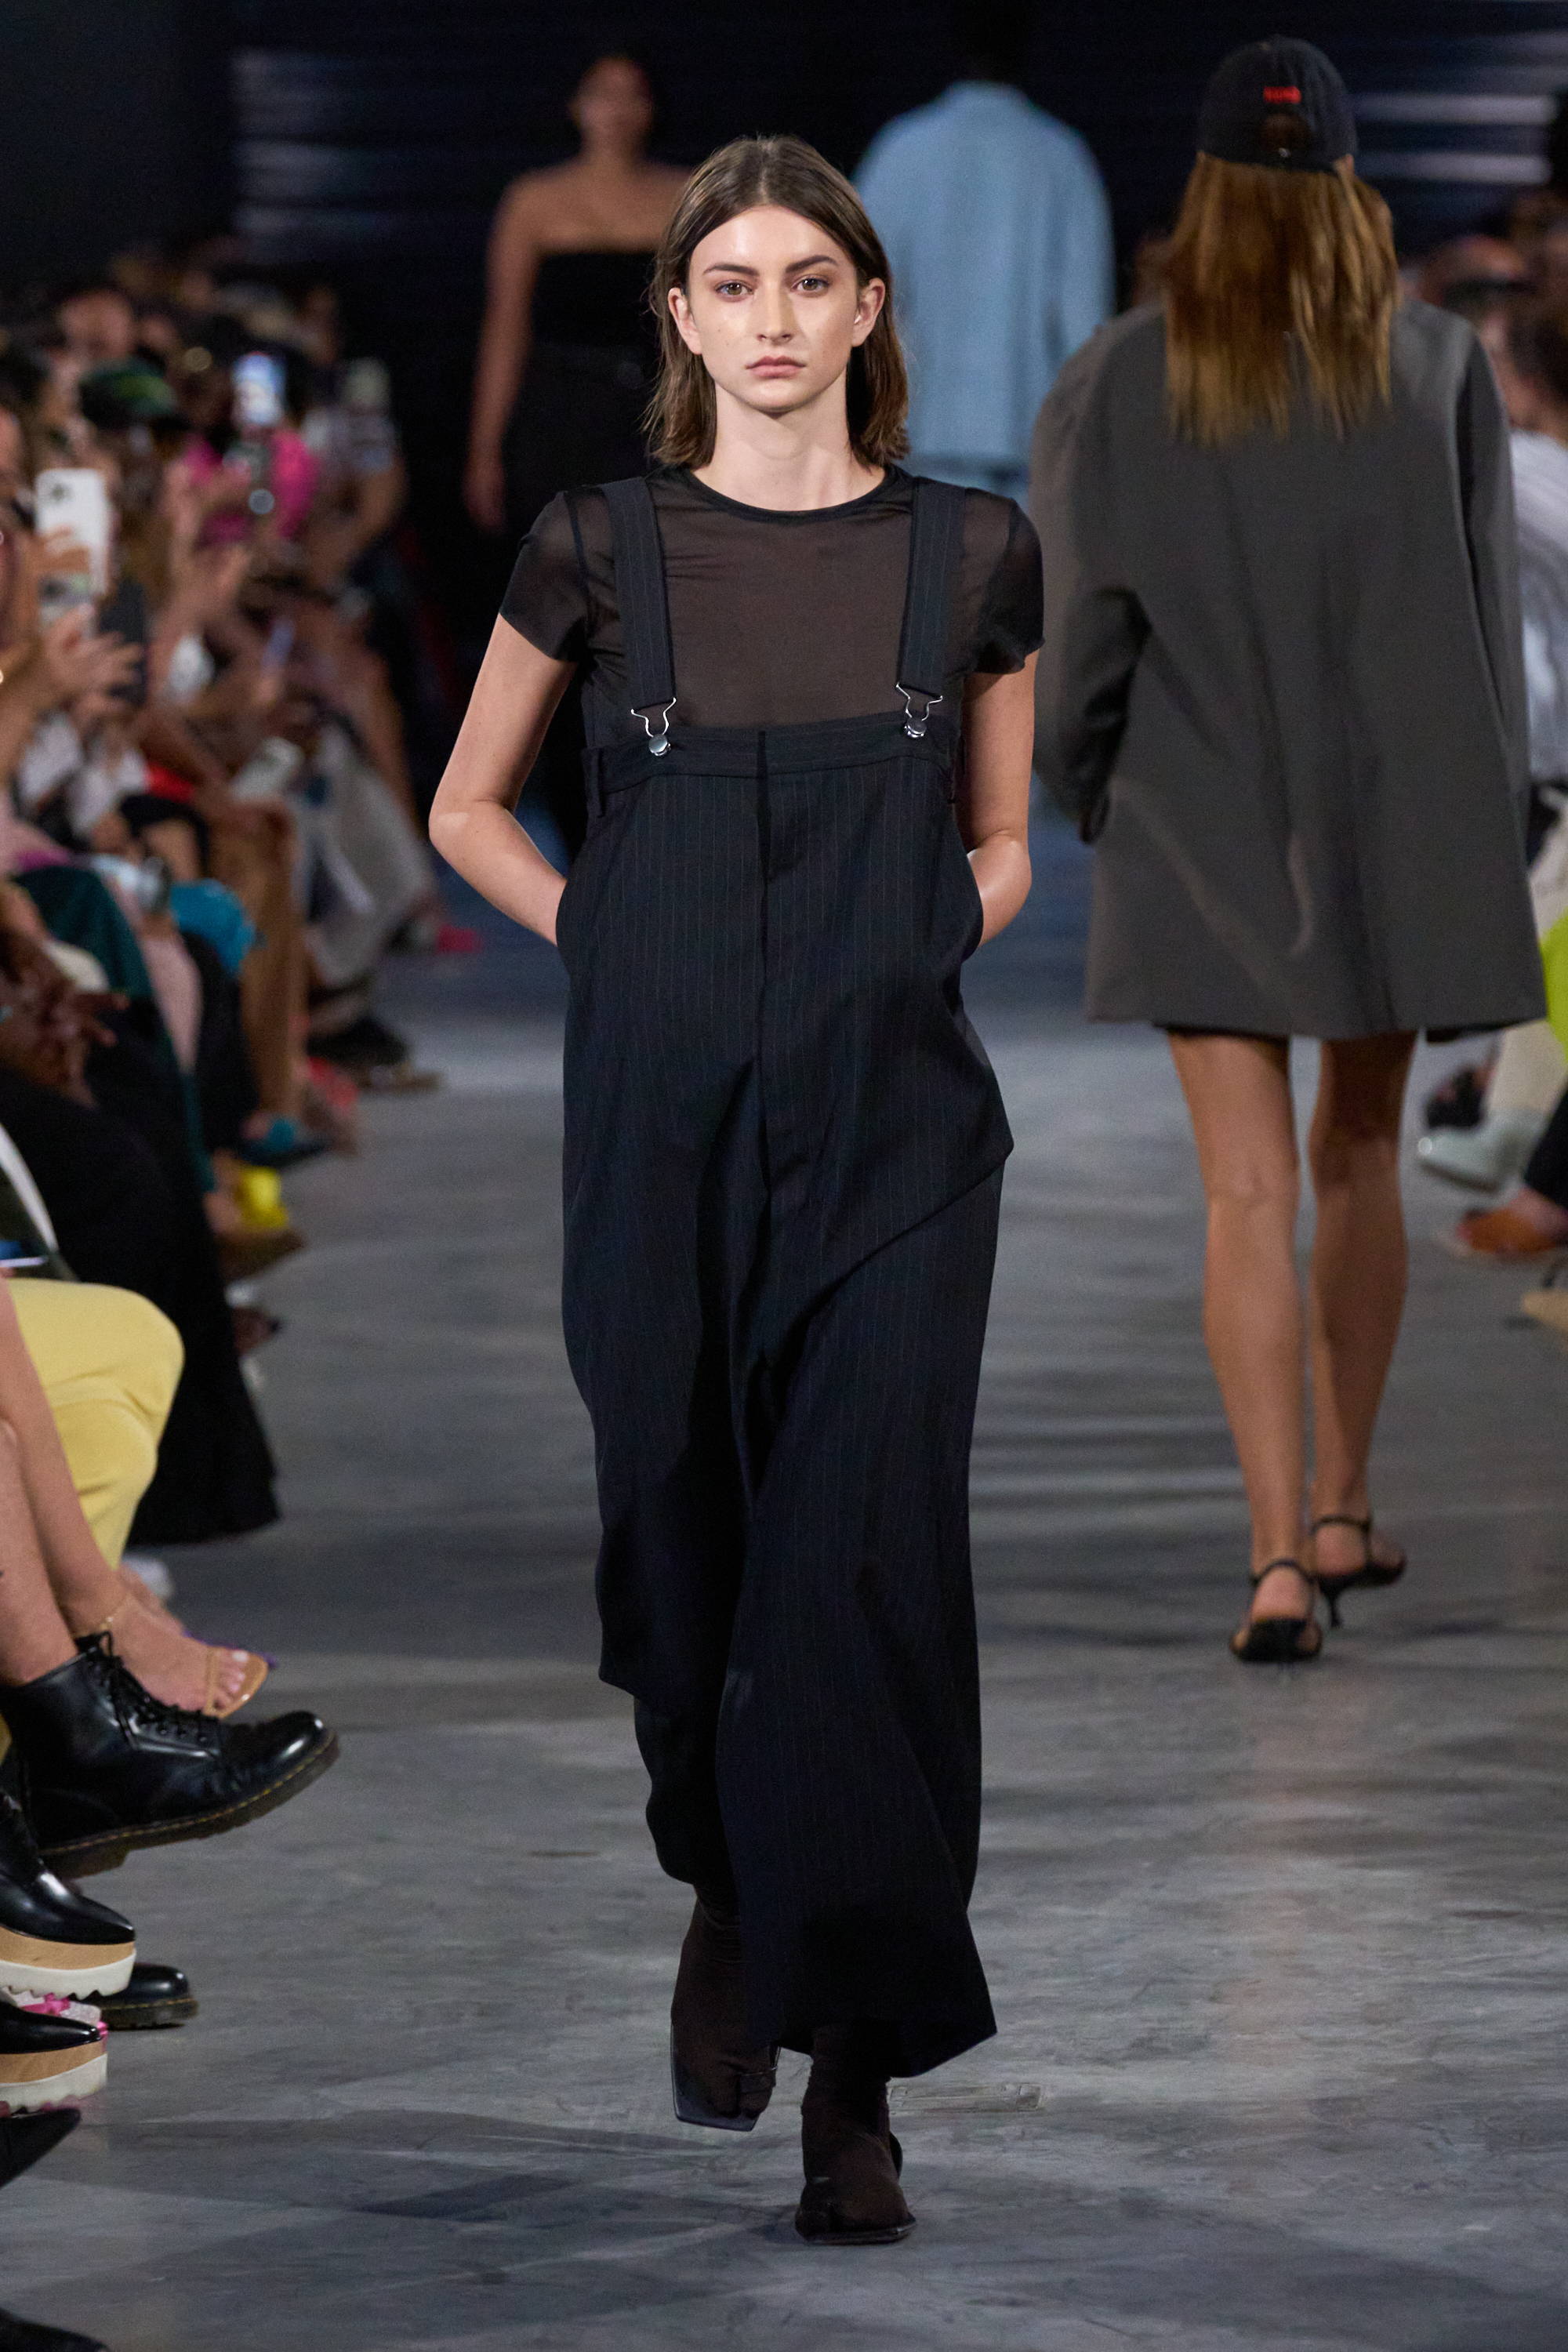 Model on a runway wearing pinstripe overalls